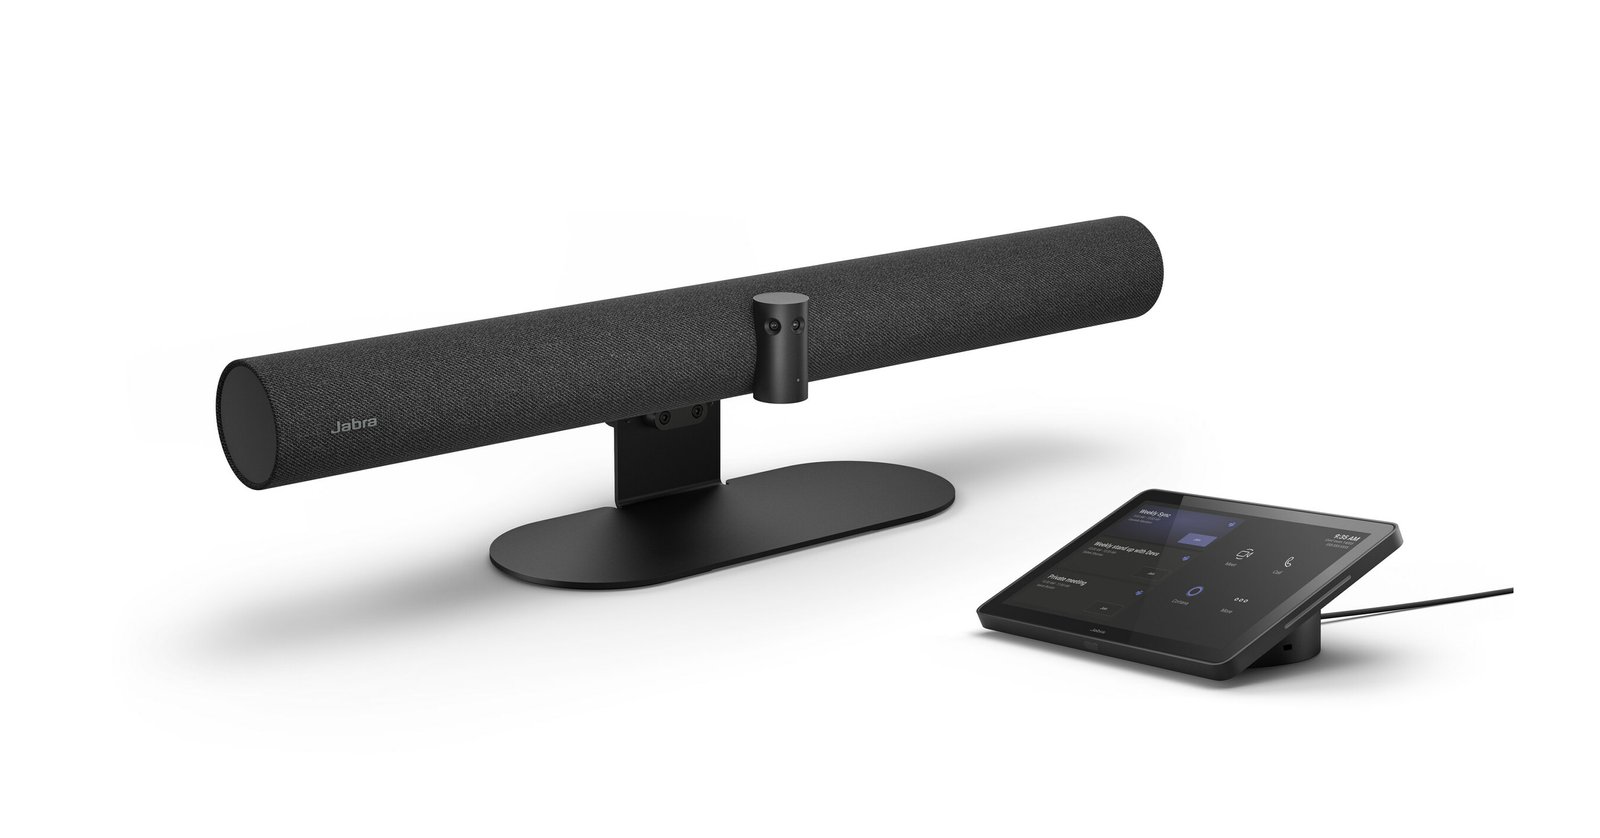 Jabra unveils PanaCast 50 Video Bar System to deliver the ultimate hybrid workplace meeting experience.